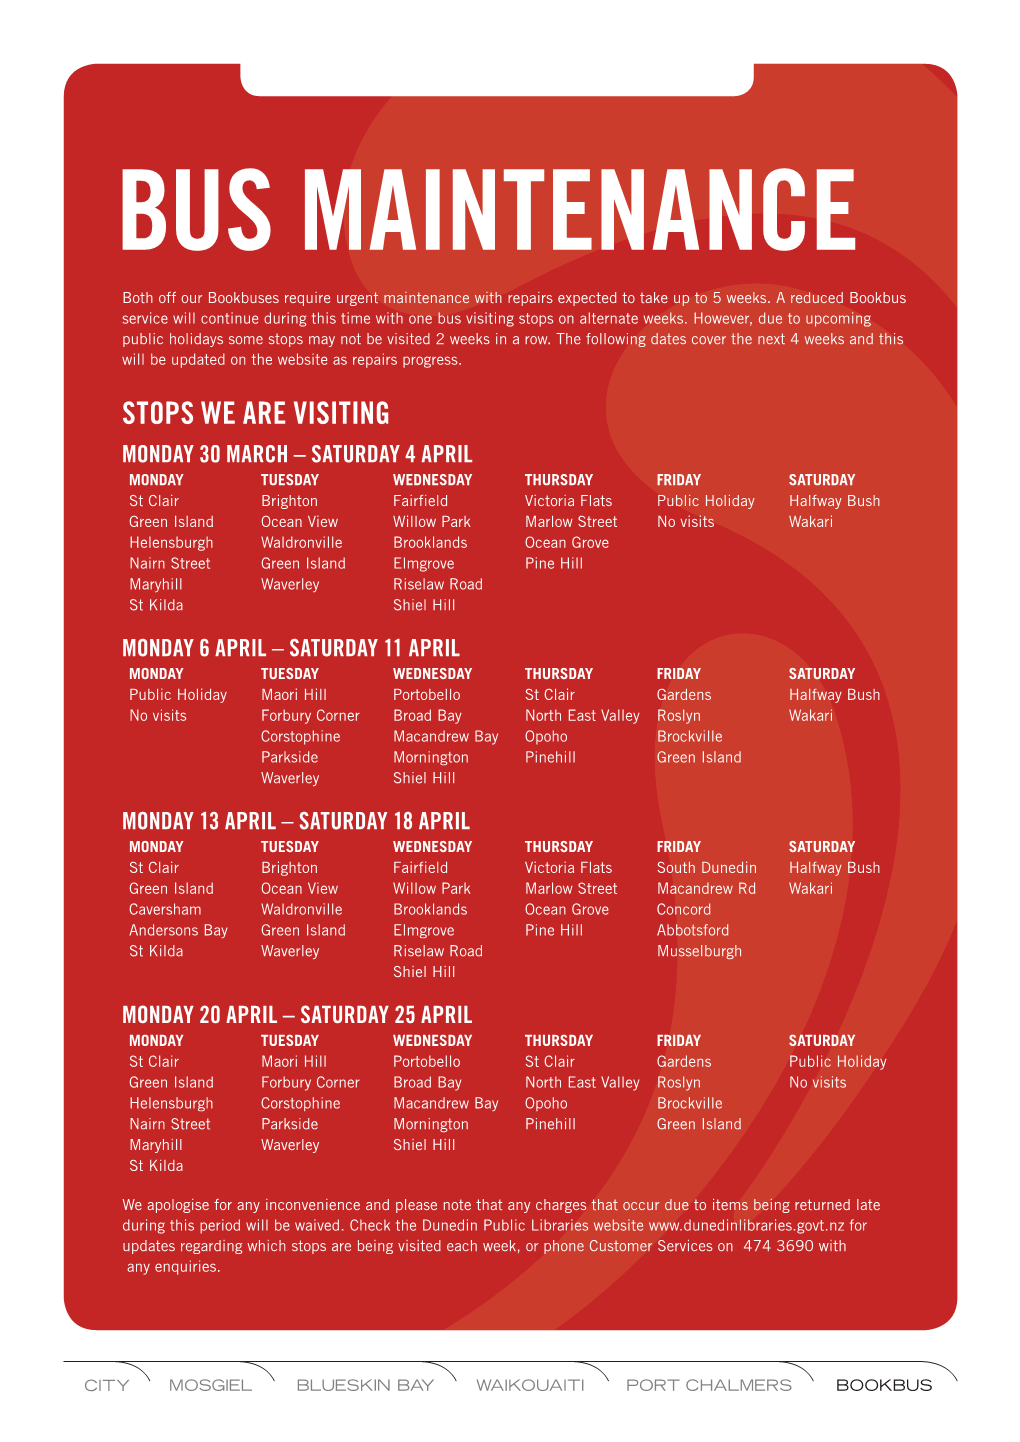 BUS MAINTENANCE Both Off Our Bookbuses Require Urgent Maintenance with Repairs Expected to Take up to 5 Weeks